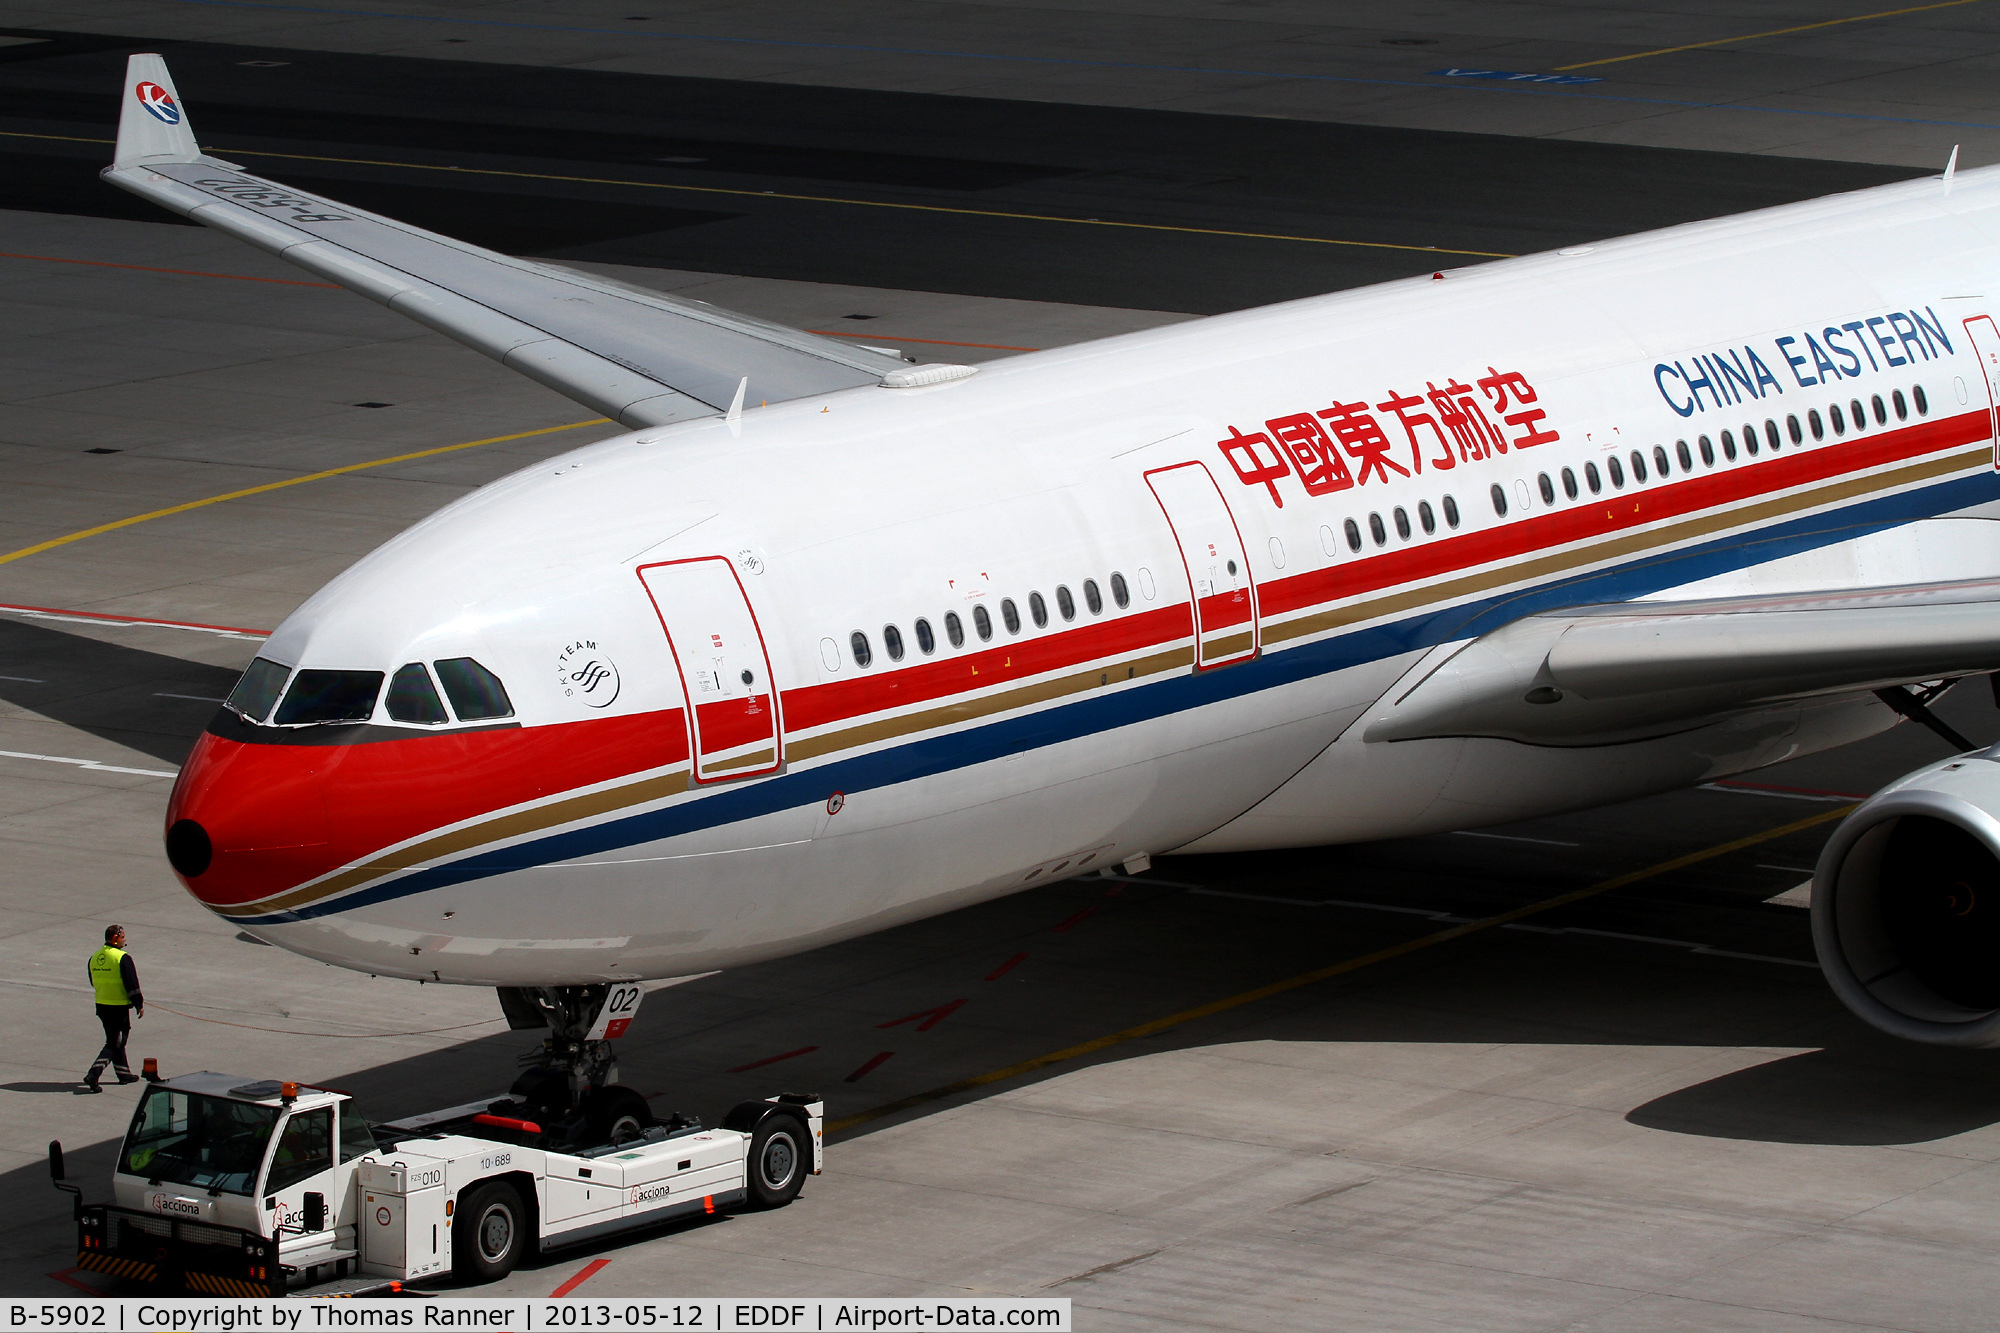 B-5902, 2012 Airbus A330-243 C/N 1324, China Eastern Airlines A330